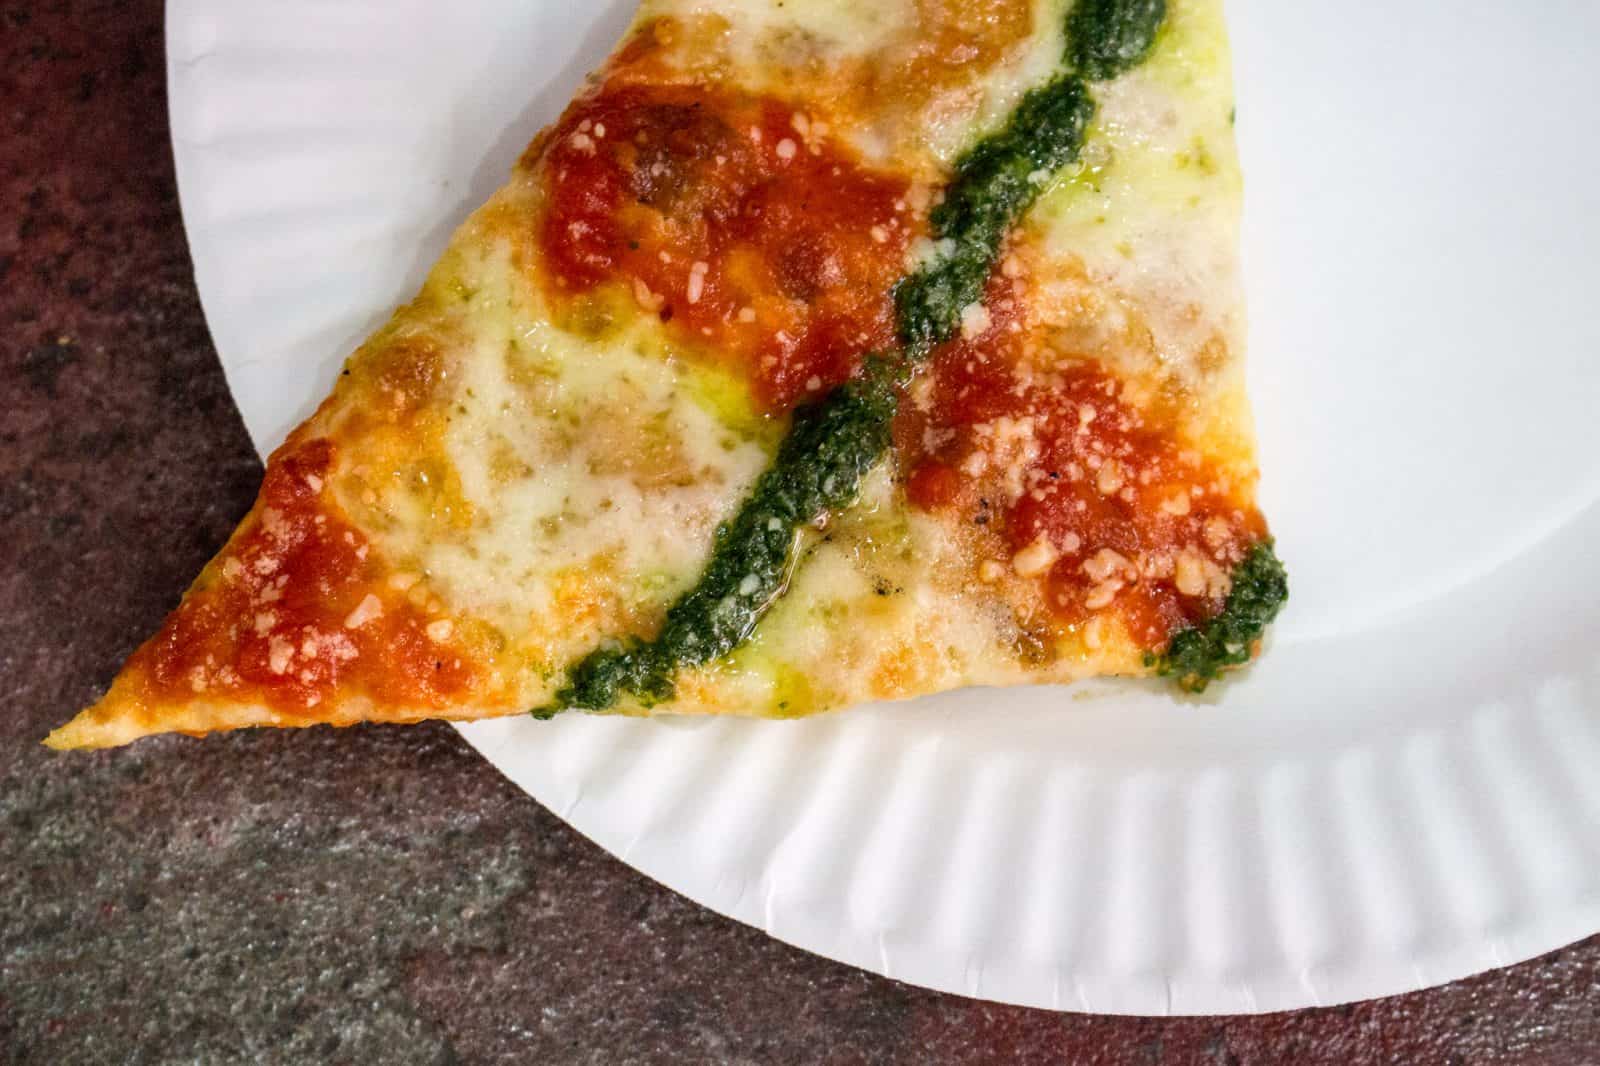 A Food Tour of Little Italy and Chinatown, New York City